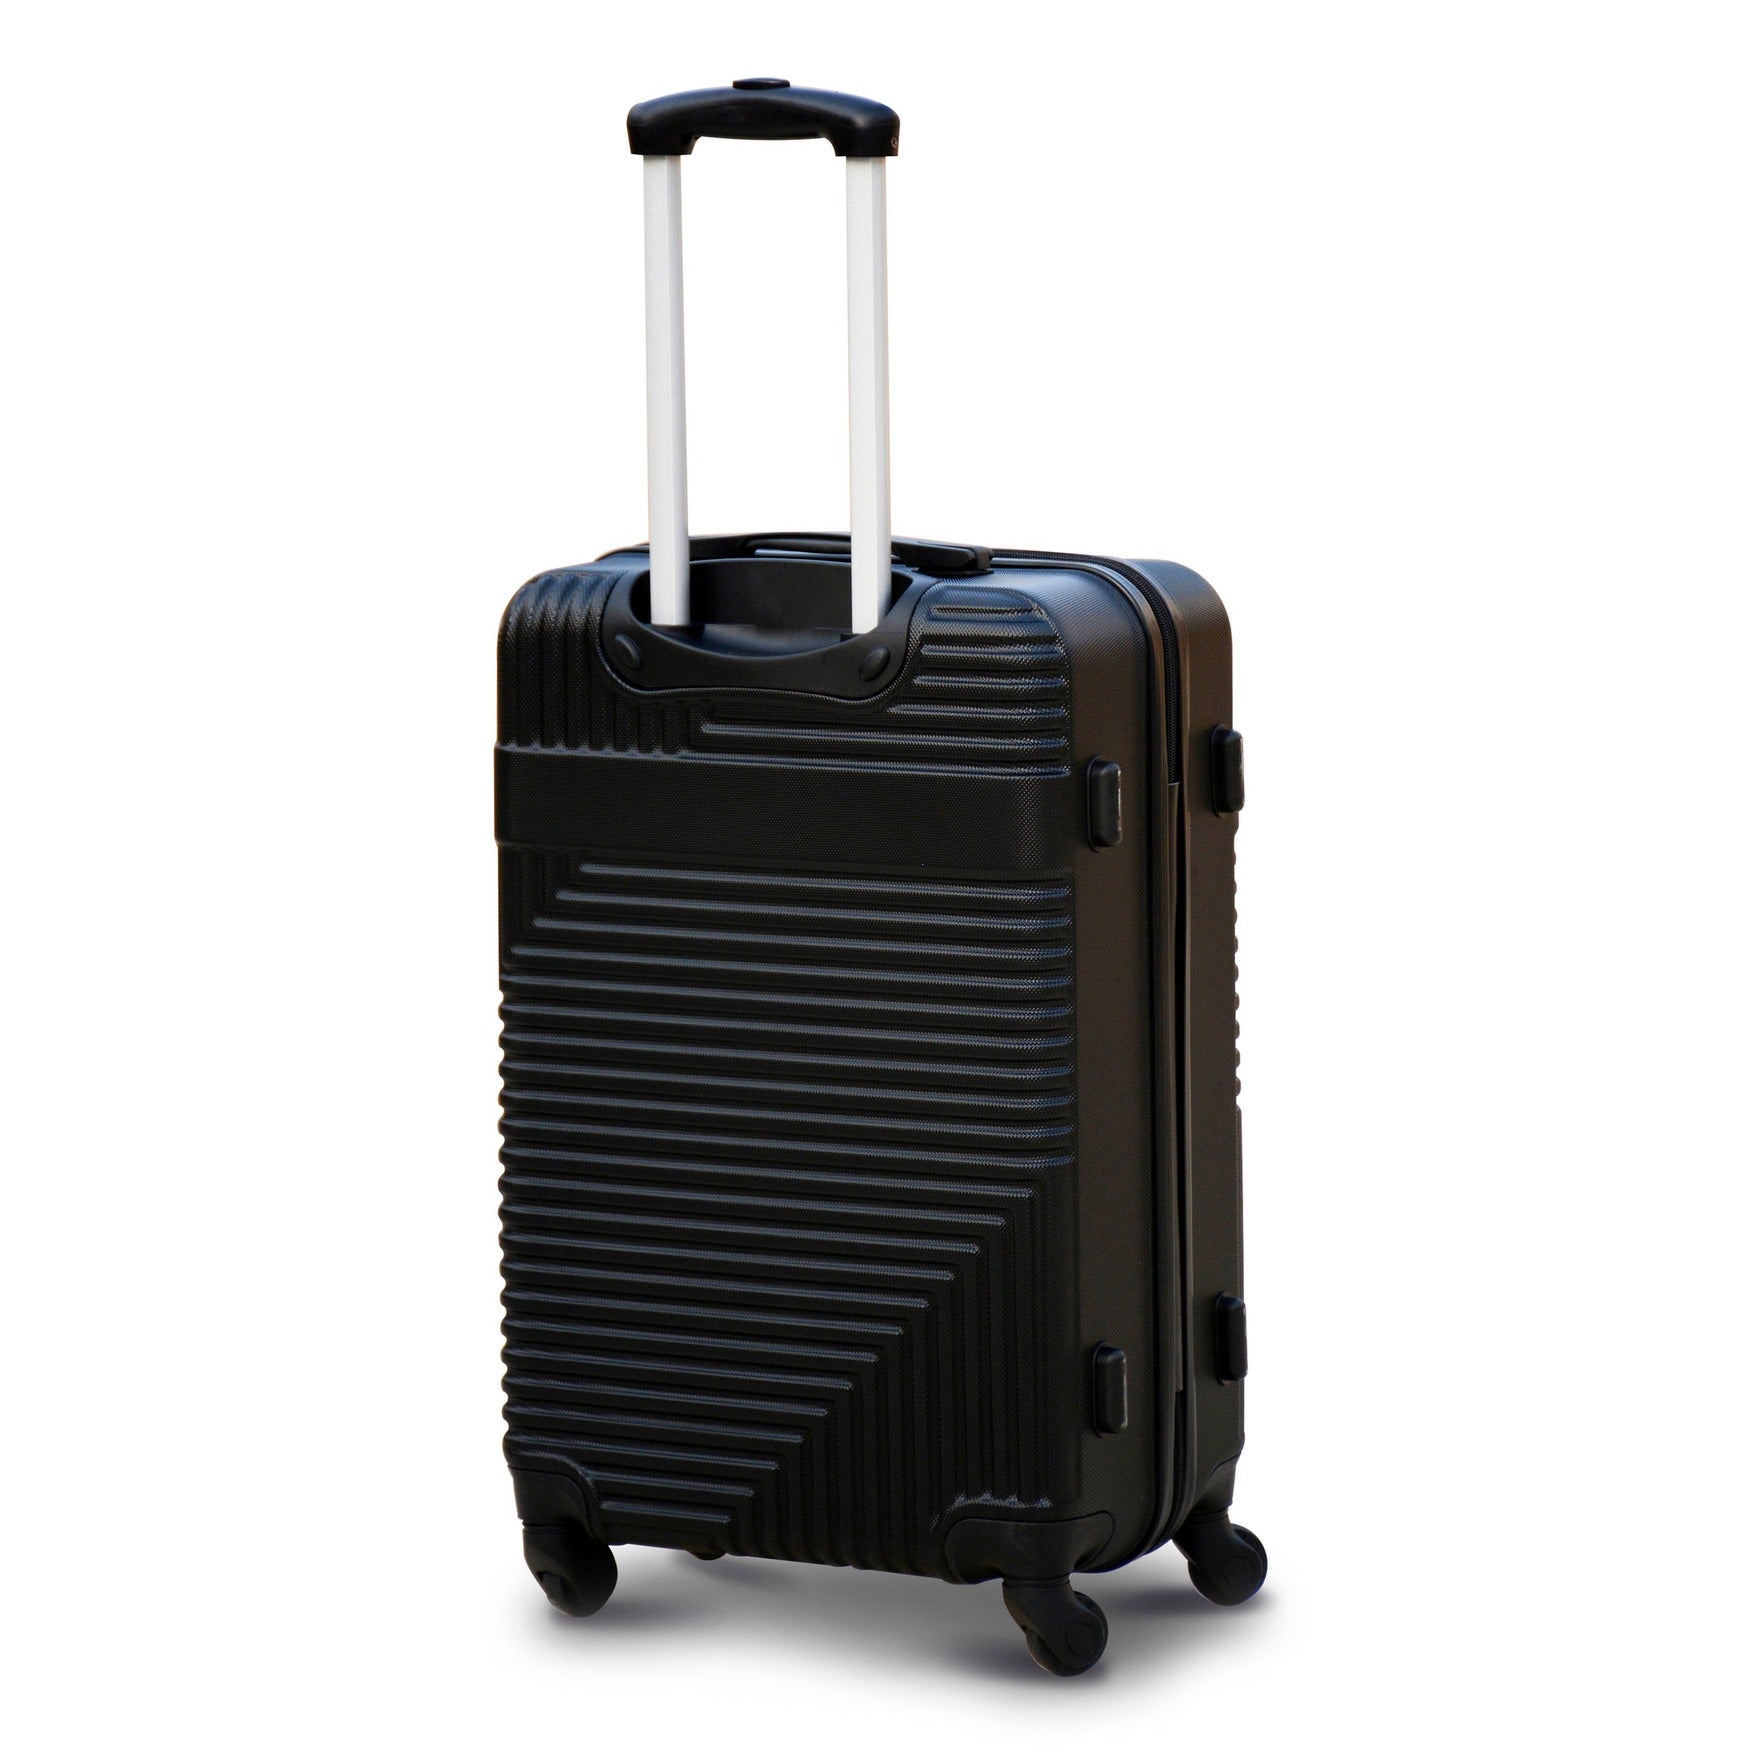 28" Black Colour Travel Way ABS Luggage Lightweight Hard Case Trolley Bag Zaappy.com